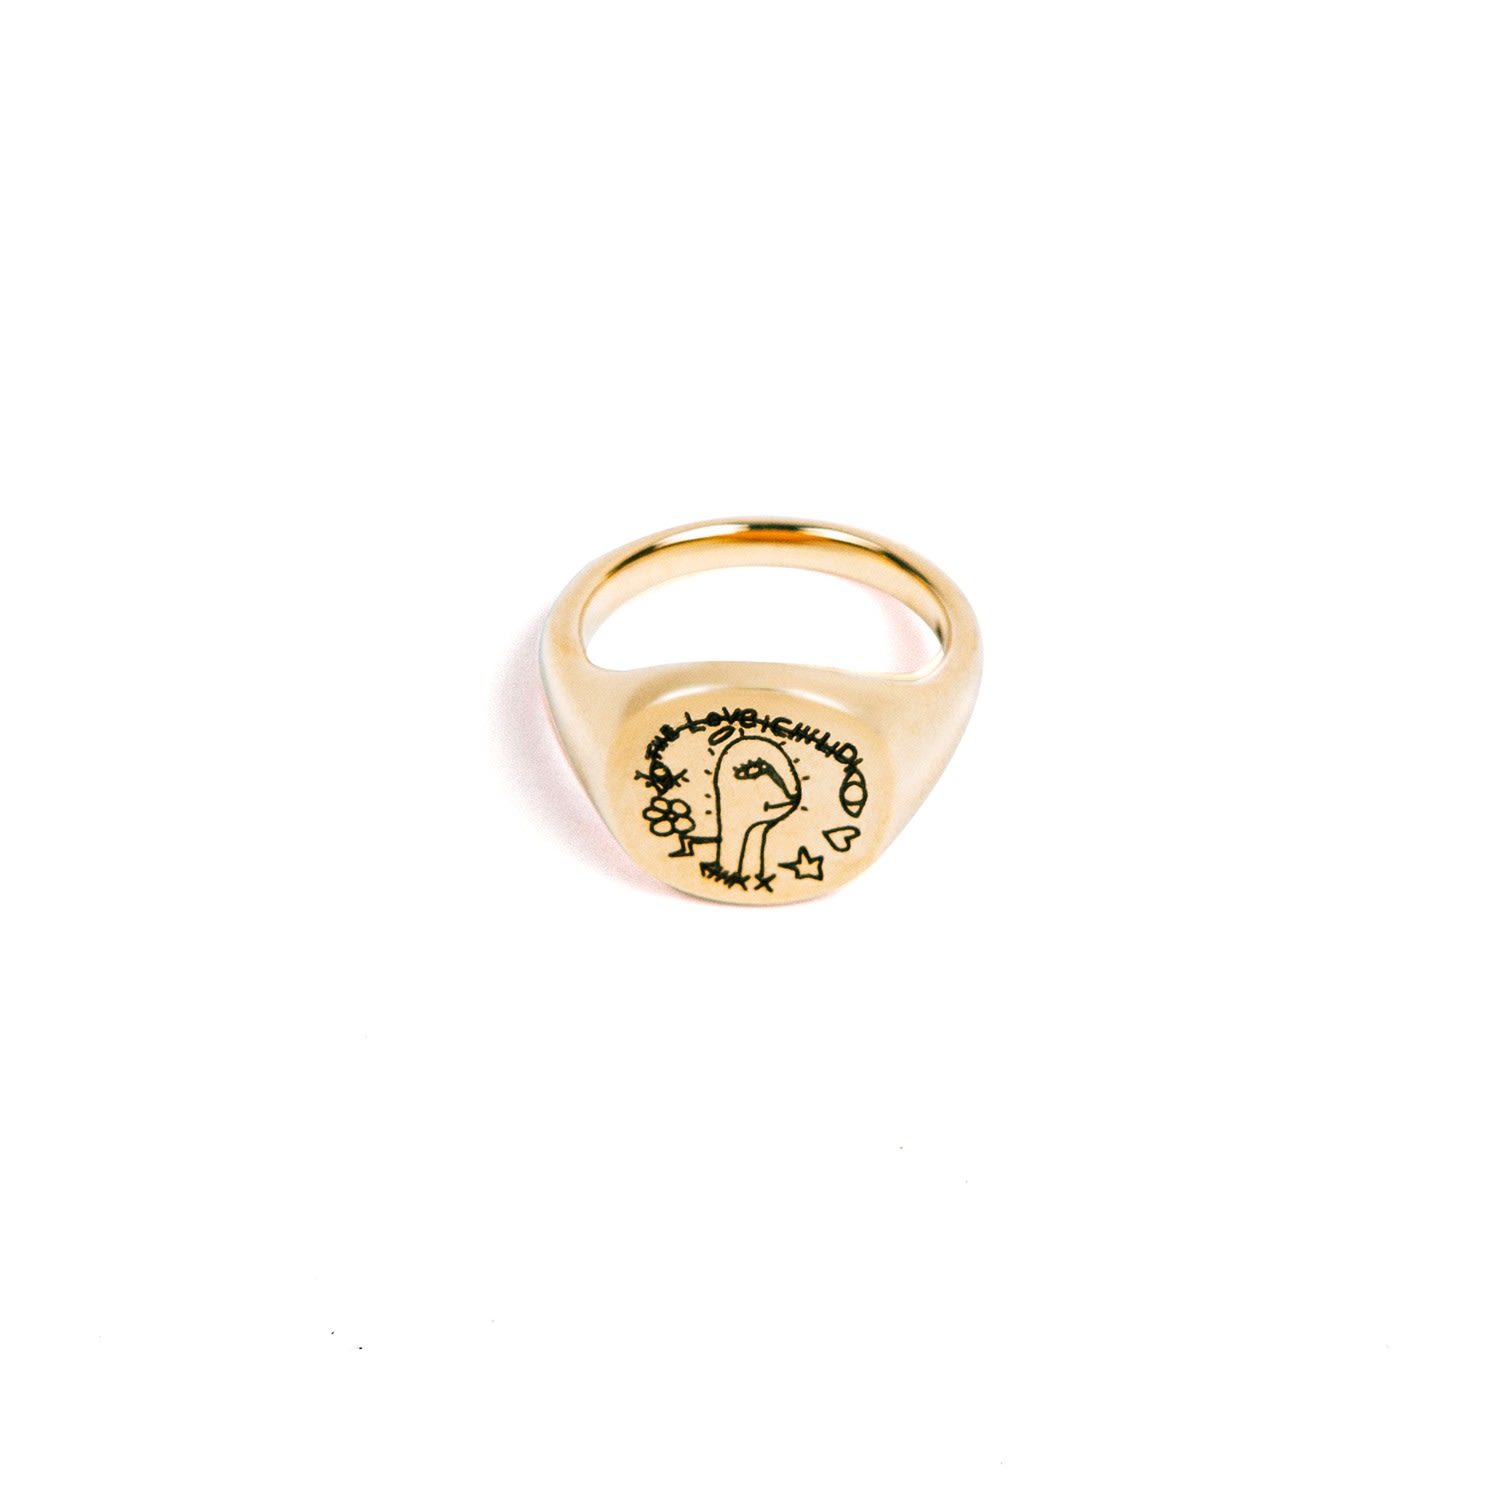 Men's Gold Signet Ring C/O The Real Love Child Undefined Jewelry